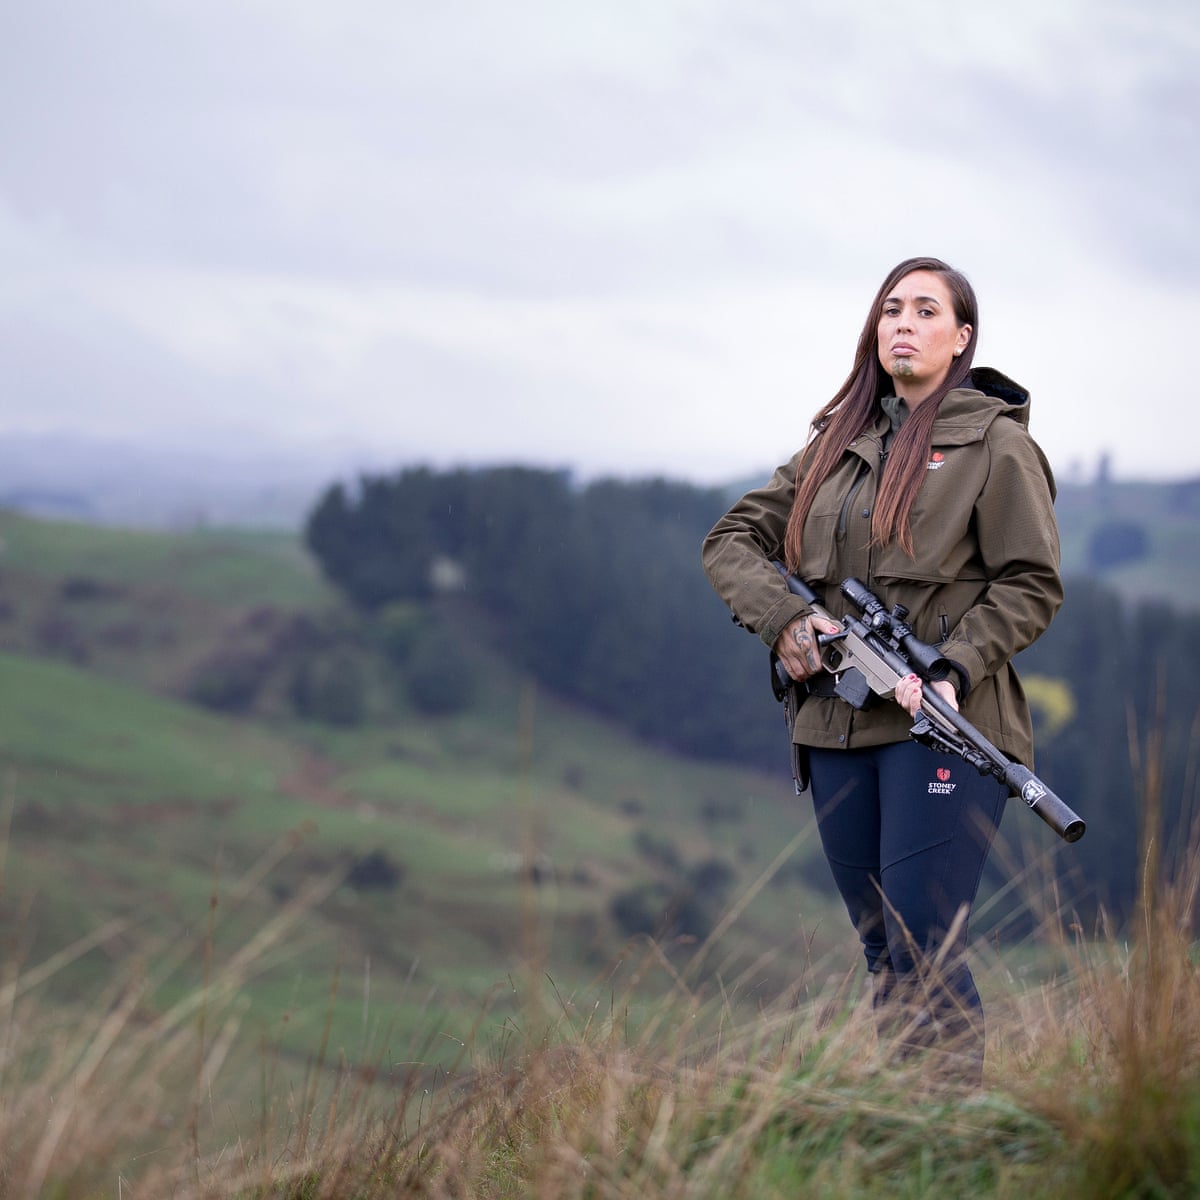 Priceless skill': The Māori hunter helping women swap the food bank for the  rifle | New Zealand | The Guardian